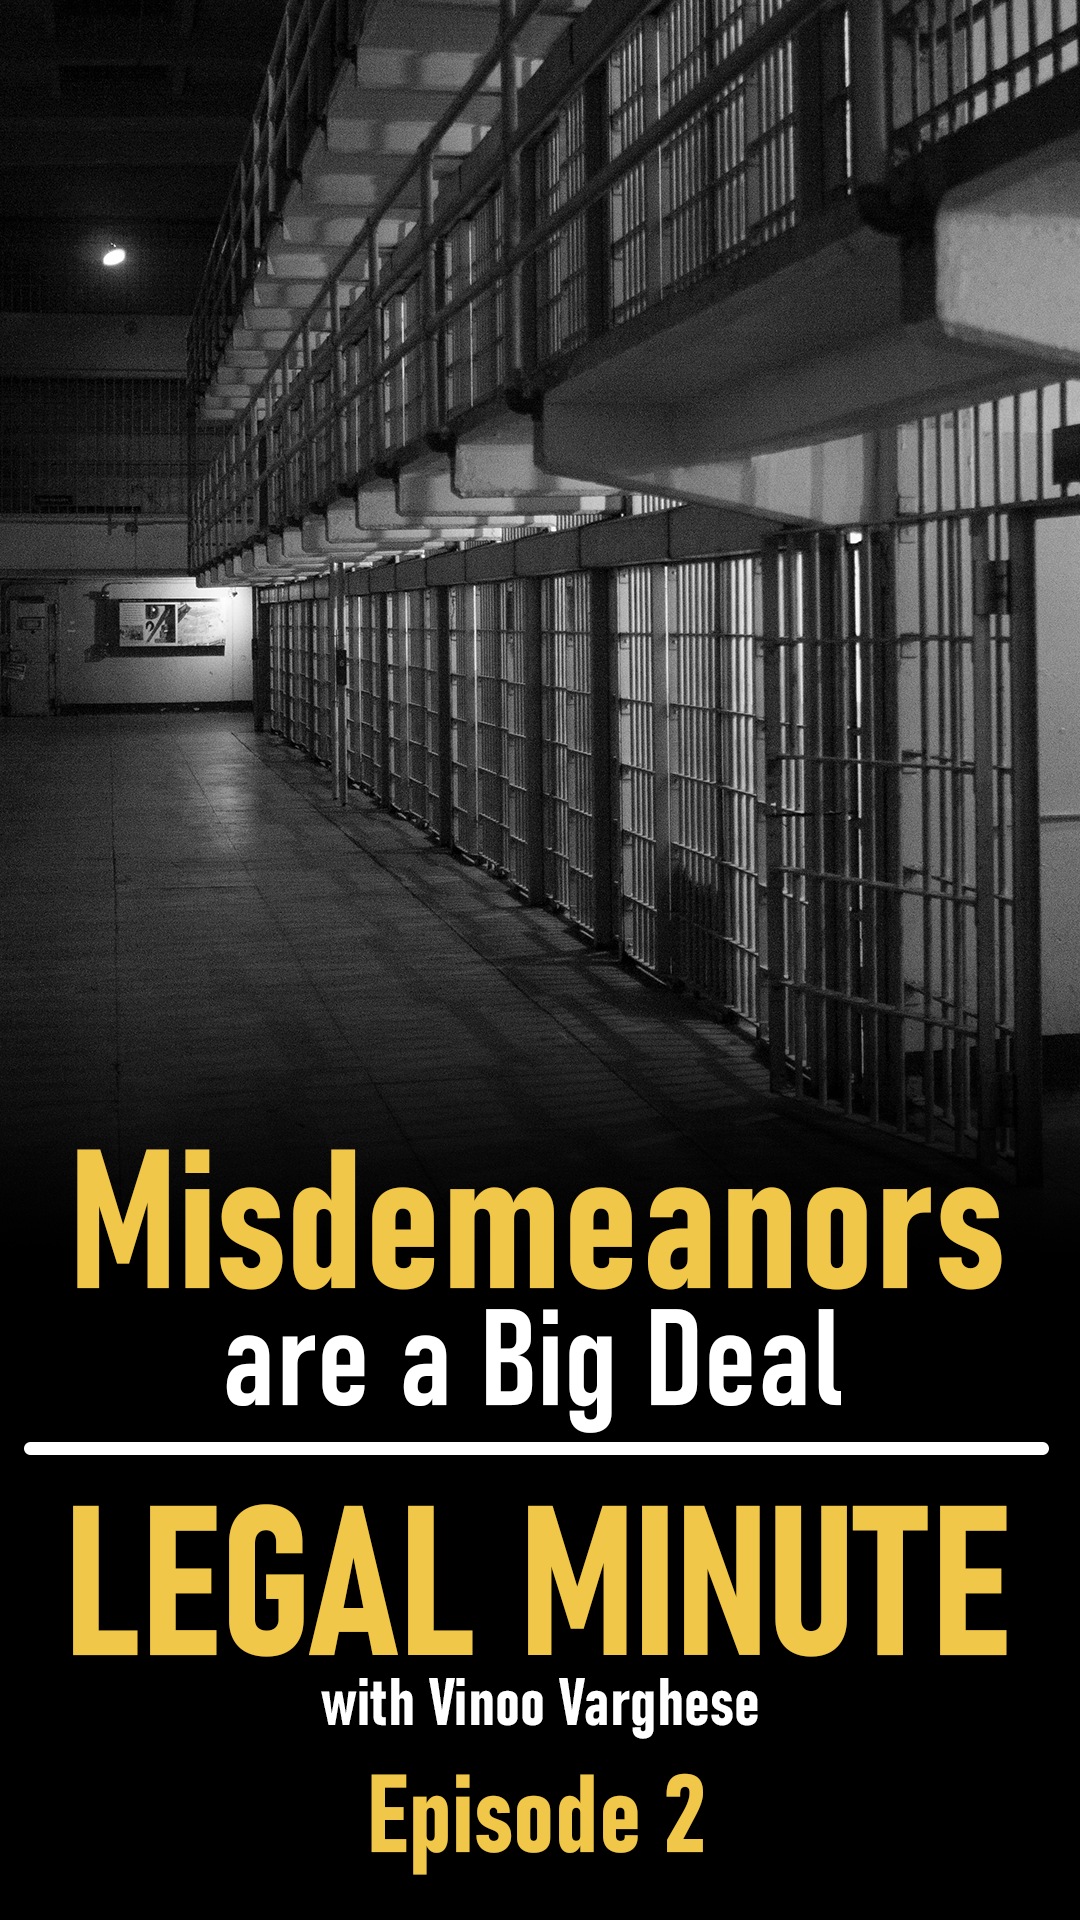 Misdemeanors are a Big Deal